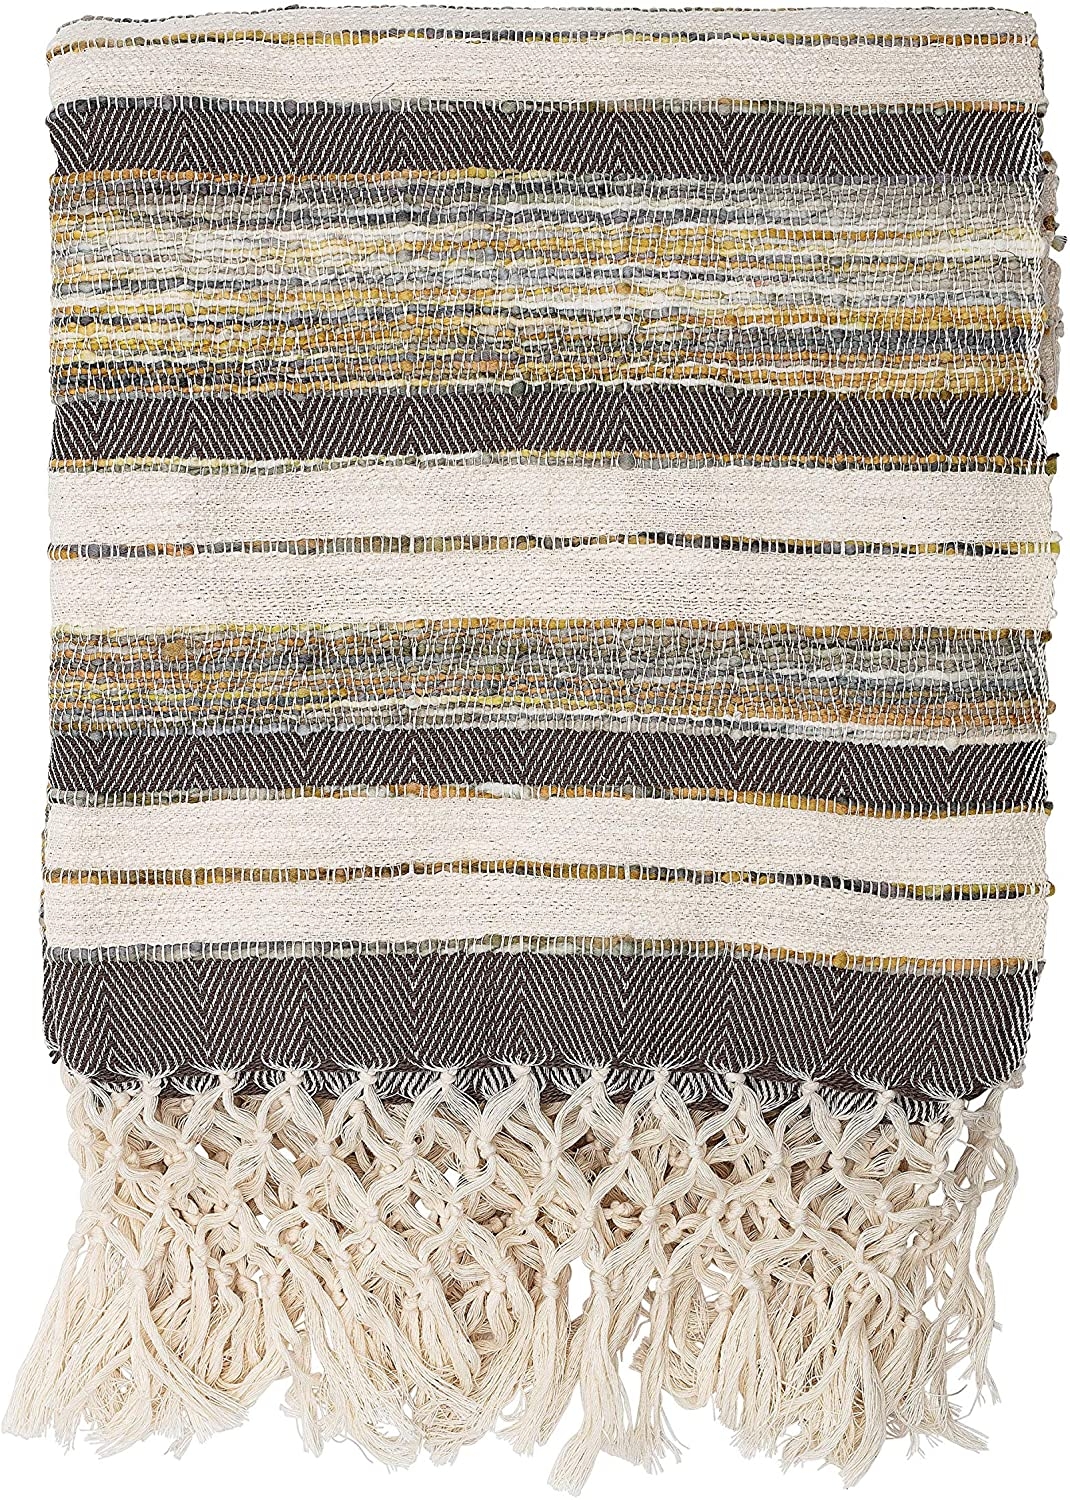 Handwoven Cotton Throw with Decorative Fringe, Gray, White & Yellow - Image 1